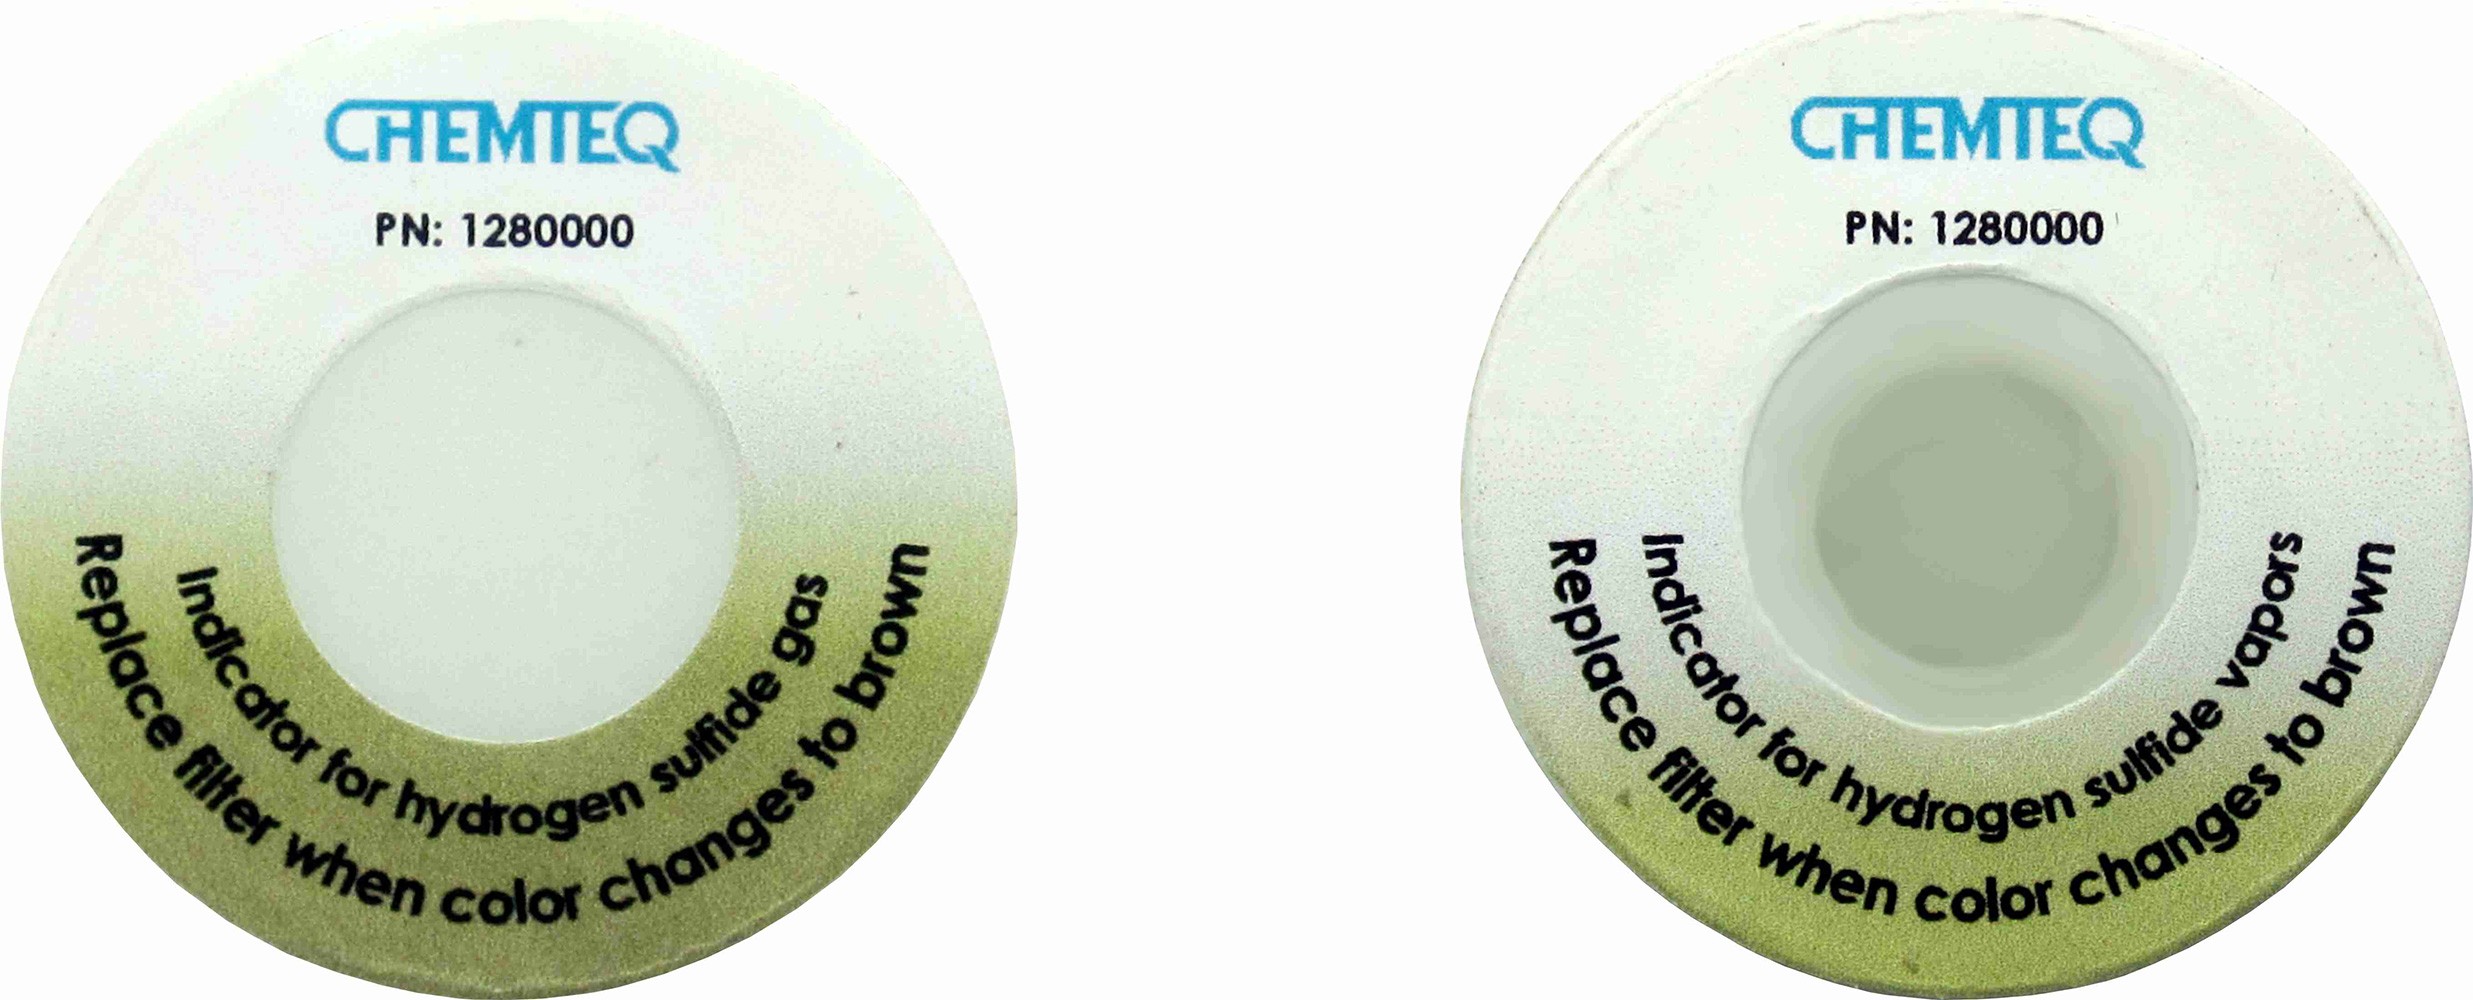 Hydrogen Sulfide Filter Breakthrough Indicator Sticker – BTIS for ductless hood and fume extractor filters. Reliable and cost effective.